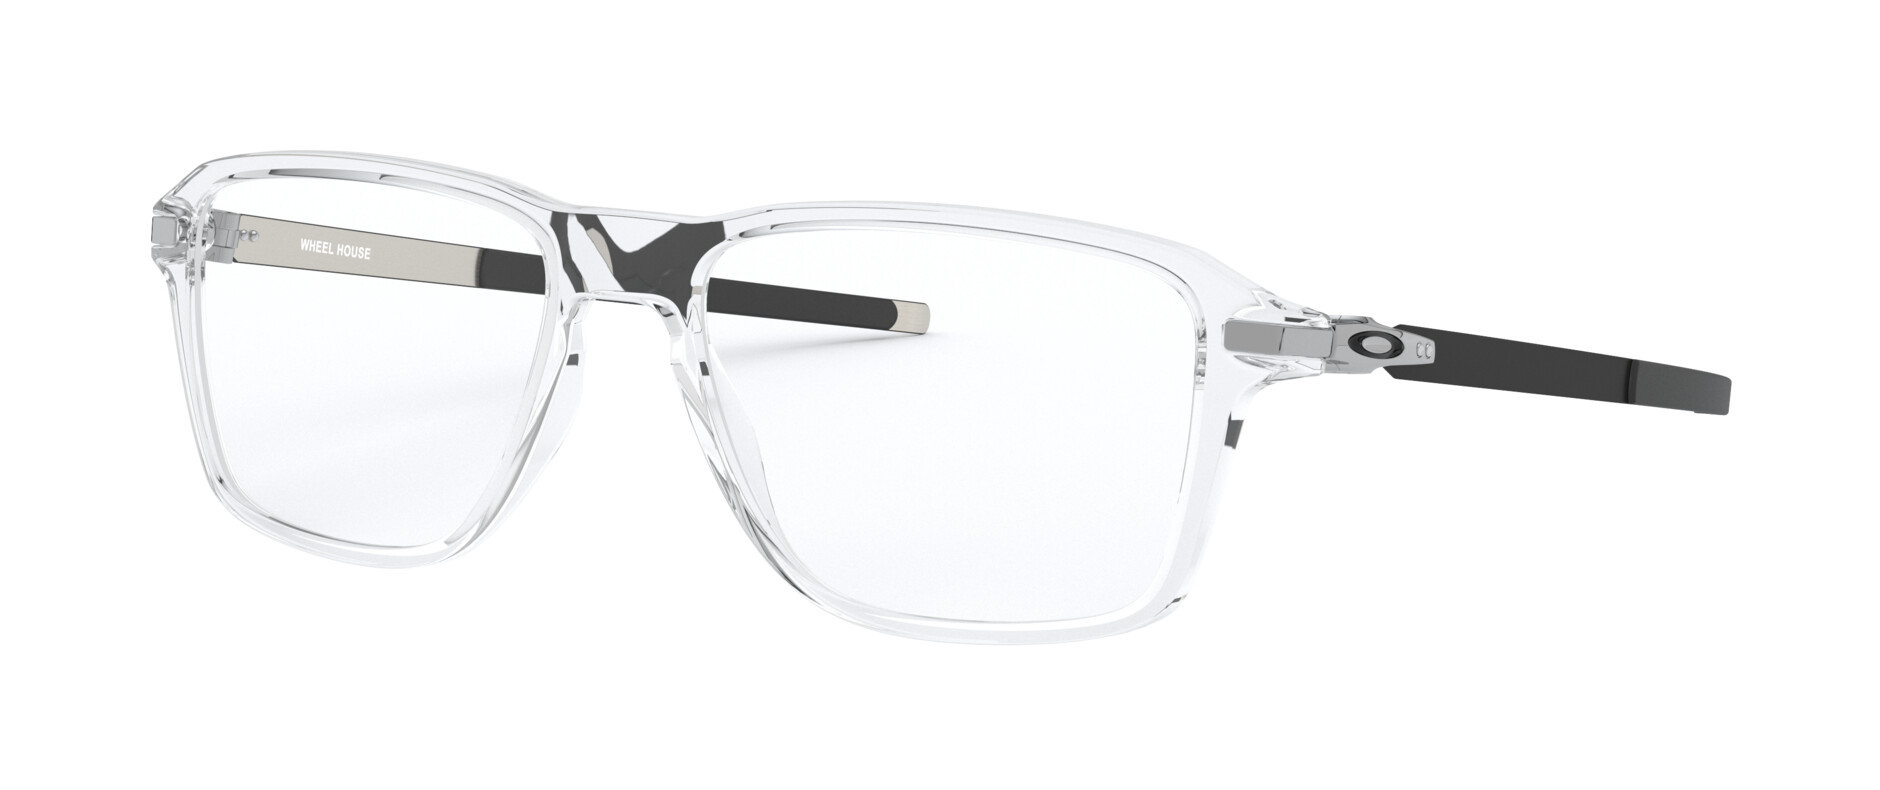 Angle_Left01 Oakley WHEEL HOUSE 0OX8166 816602 Brille Transparent